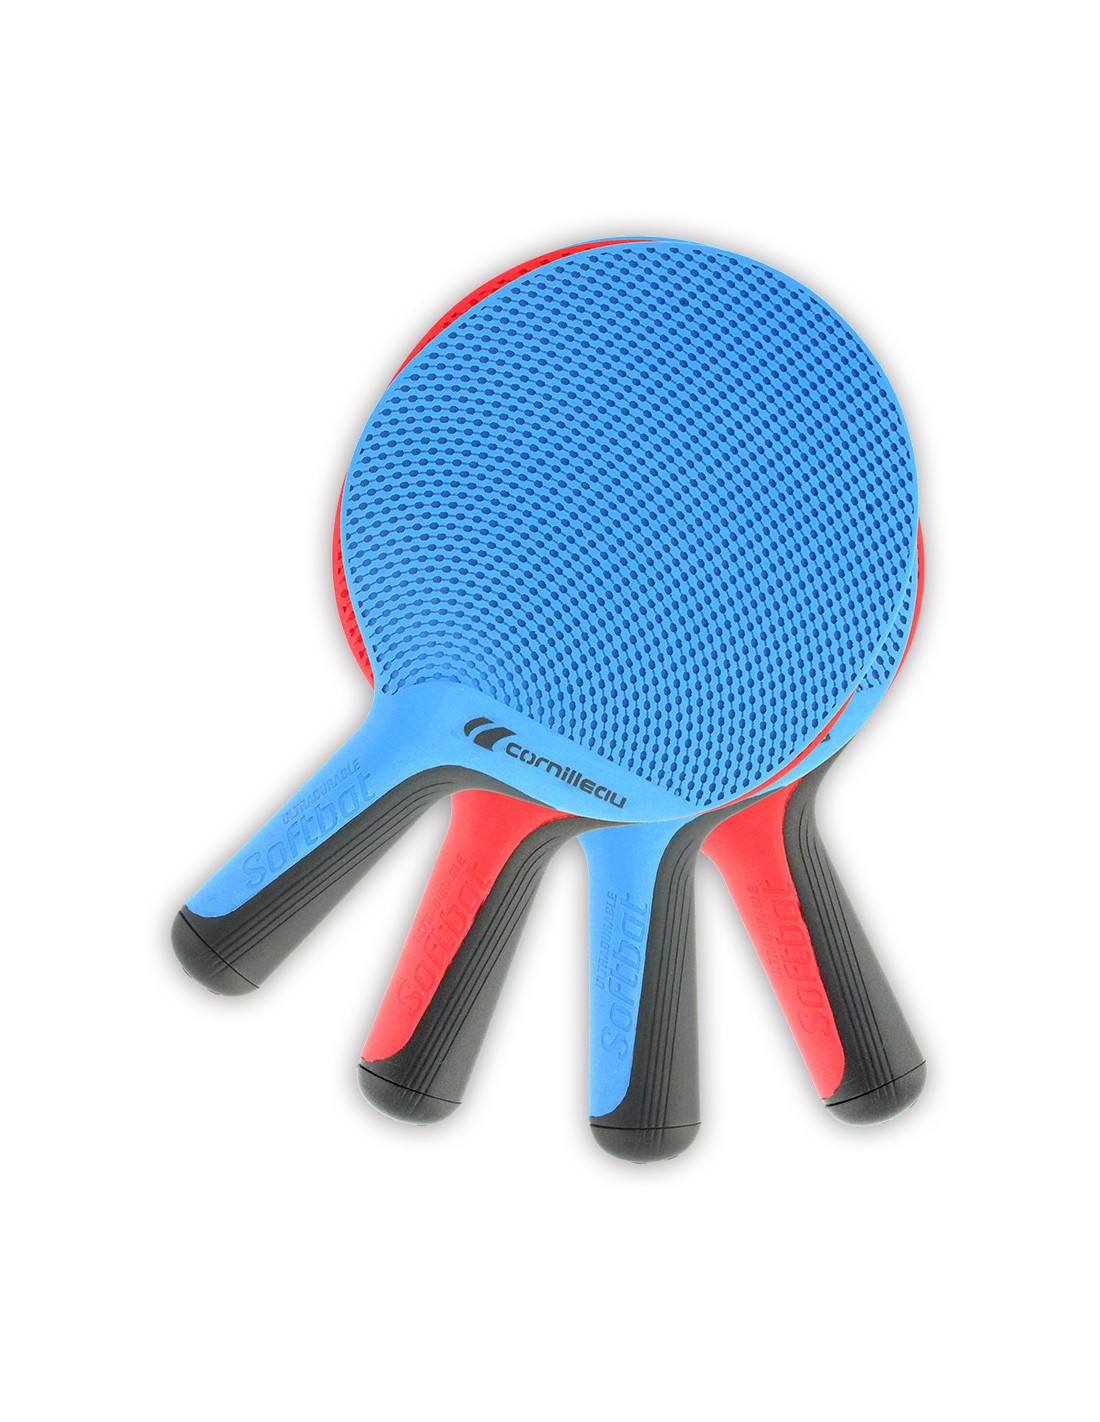 How to choose your ping-pong racket - Cornilleau